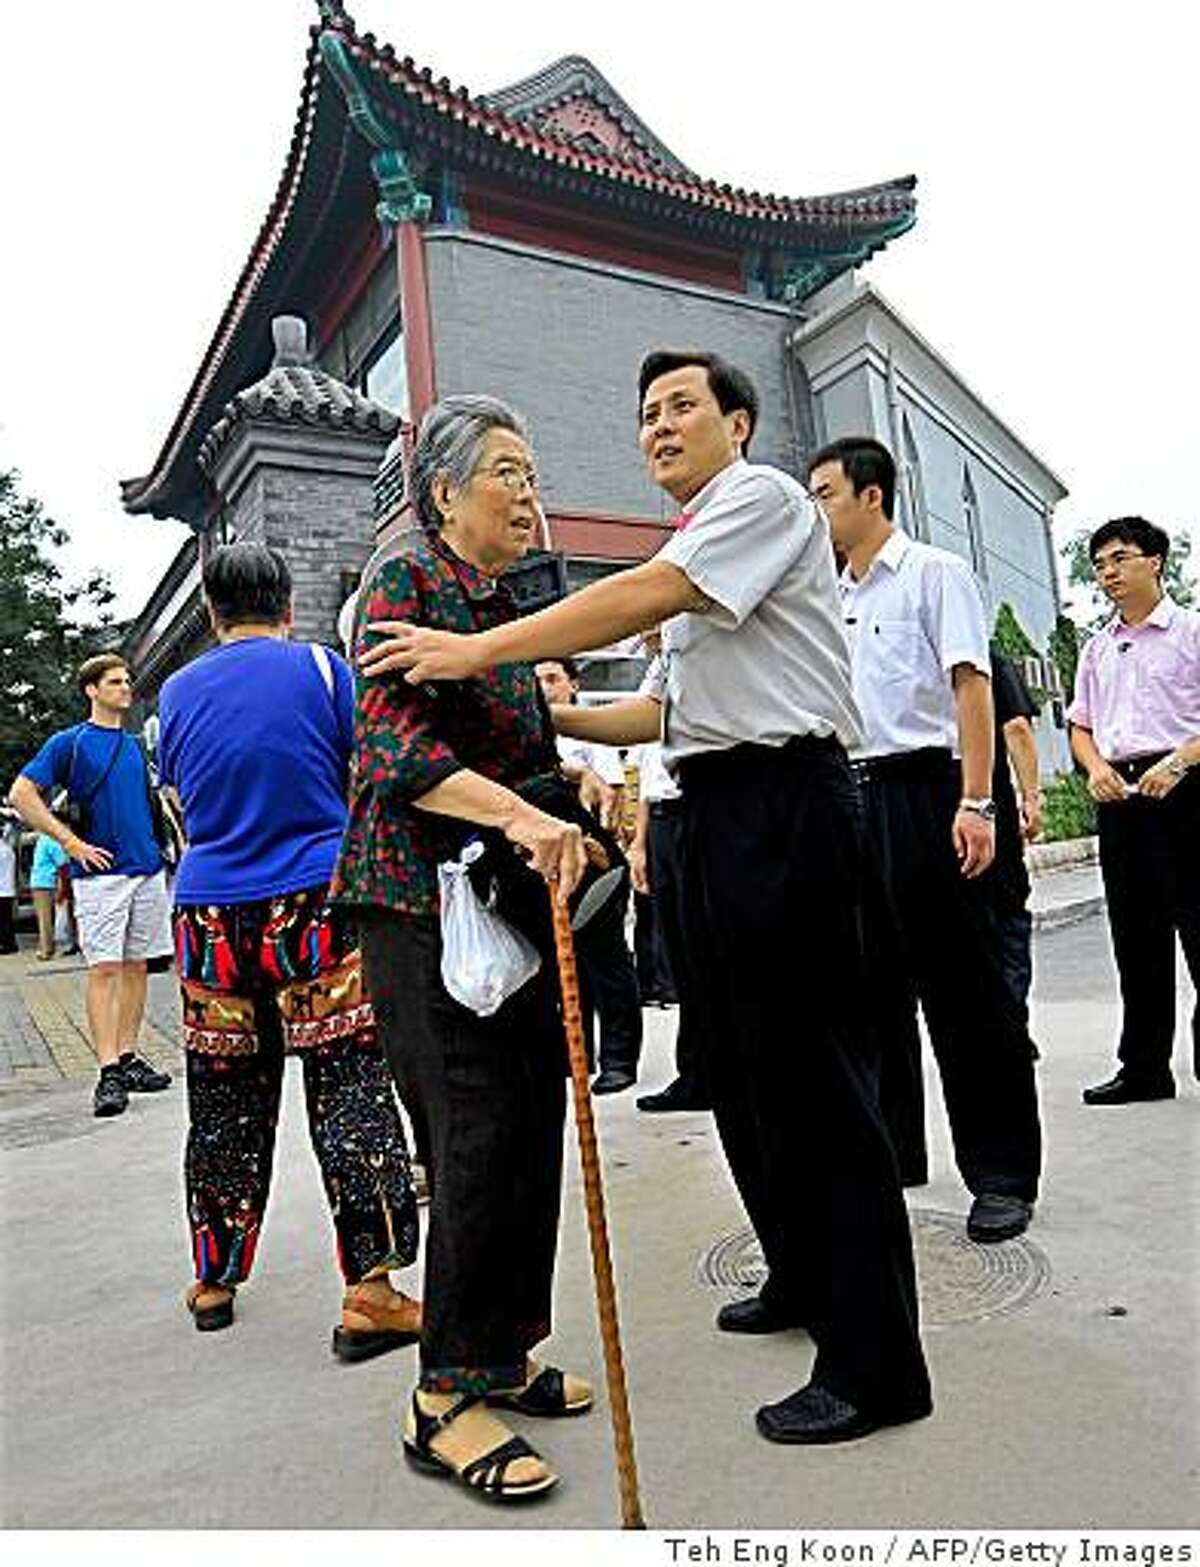 A security official stops a Chinese Christian from attending Sunday service at Beijing Kuanjie Protestant Christian Church in Beijing on August 10, 2008, where US President George W. Bush is attending a service. Bush, who has been in China since August 7 on a visit to the 2008 Beijing Olympic Games, attended a service at the Protestant church in Beijing, reinforcing his call for freedom of religion ahead of a meeting with his Chinese counterpart Hu Jintao. AFP PHOTO/TEH Eng Koon (Photo credit should read TEH ENG KOON/AFP/Getty Images)